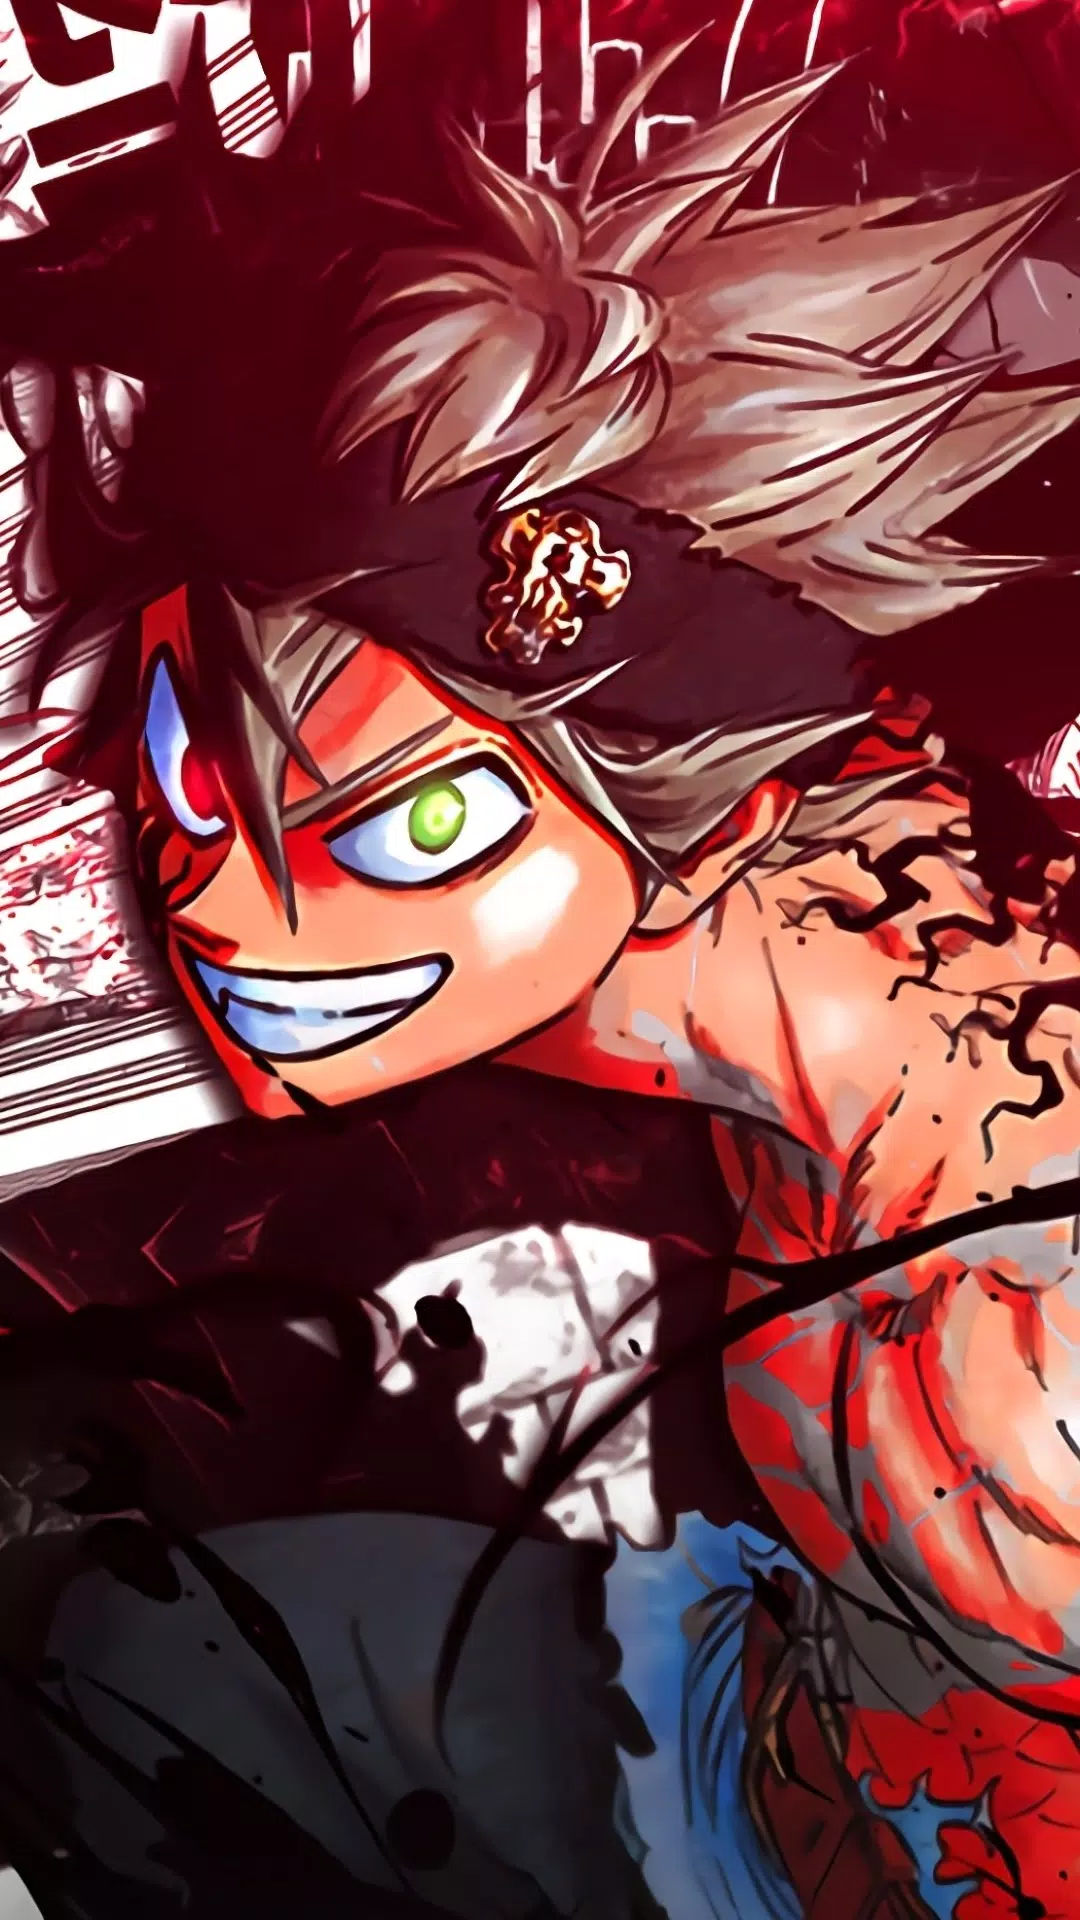 Asta Wallpaper HD 2K 4K APK for Android Download